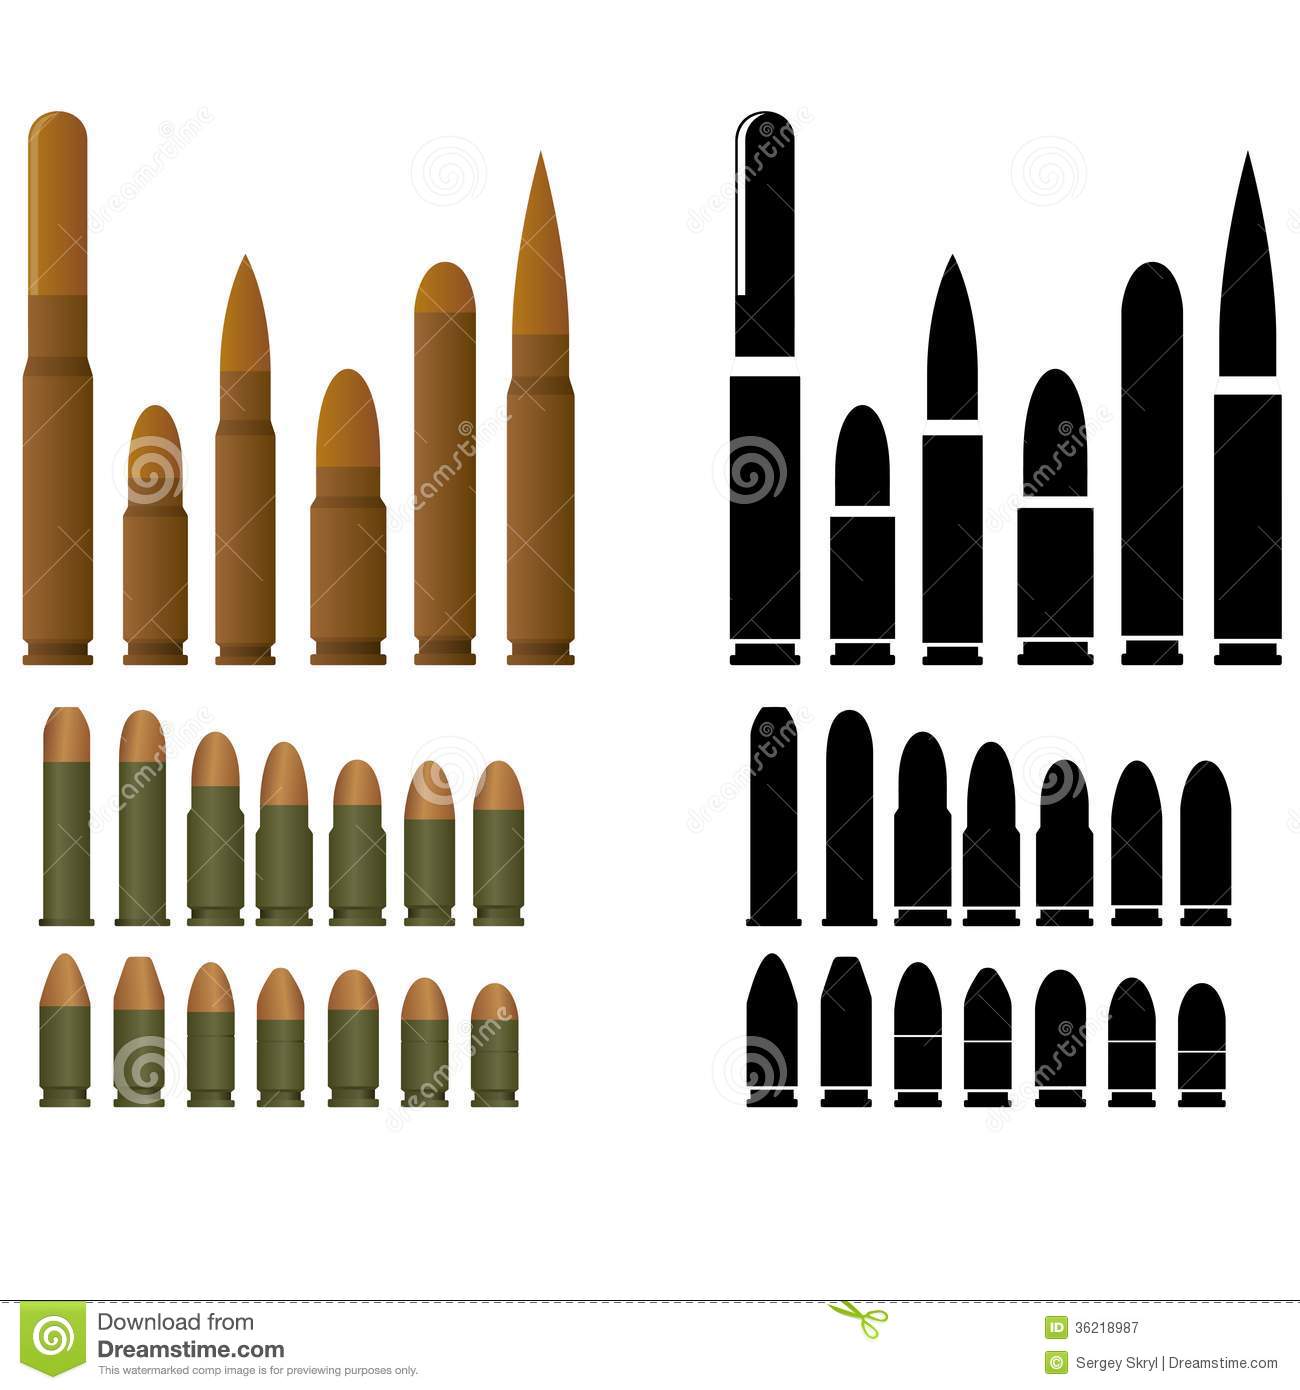 Ammo clipart #2, Download drawings